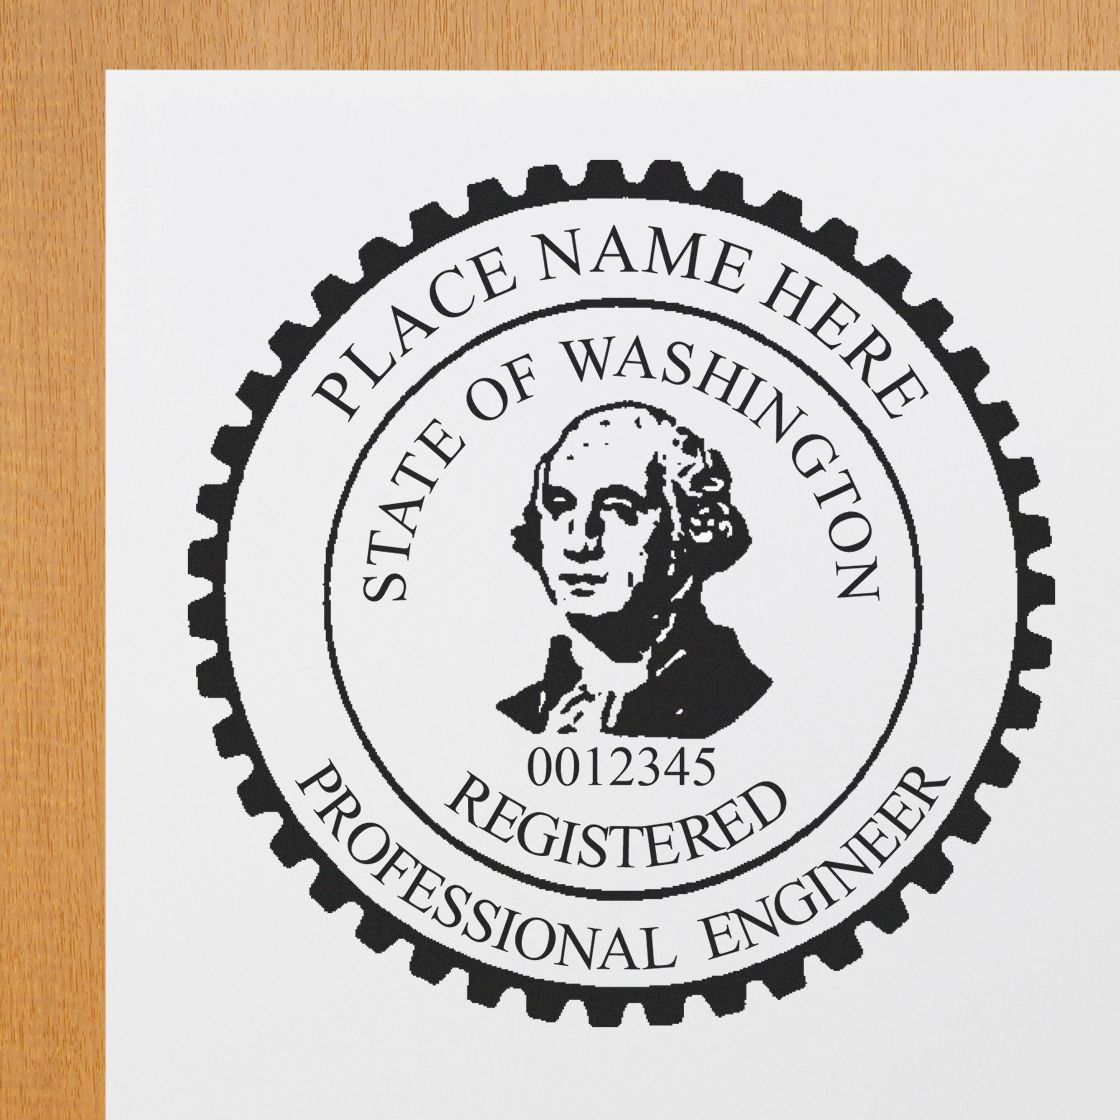 This paper is stamped with a sample imprint of the Washington Professional Engineer Seal Stamp, signifying its quality and reliability.